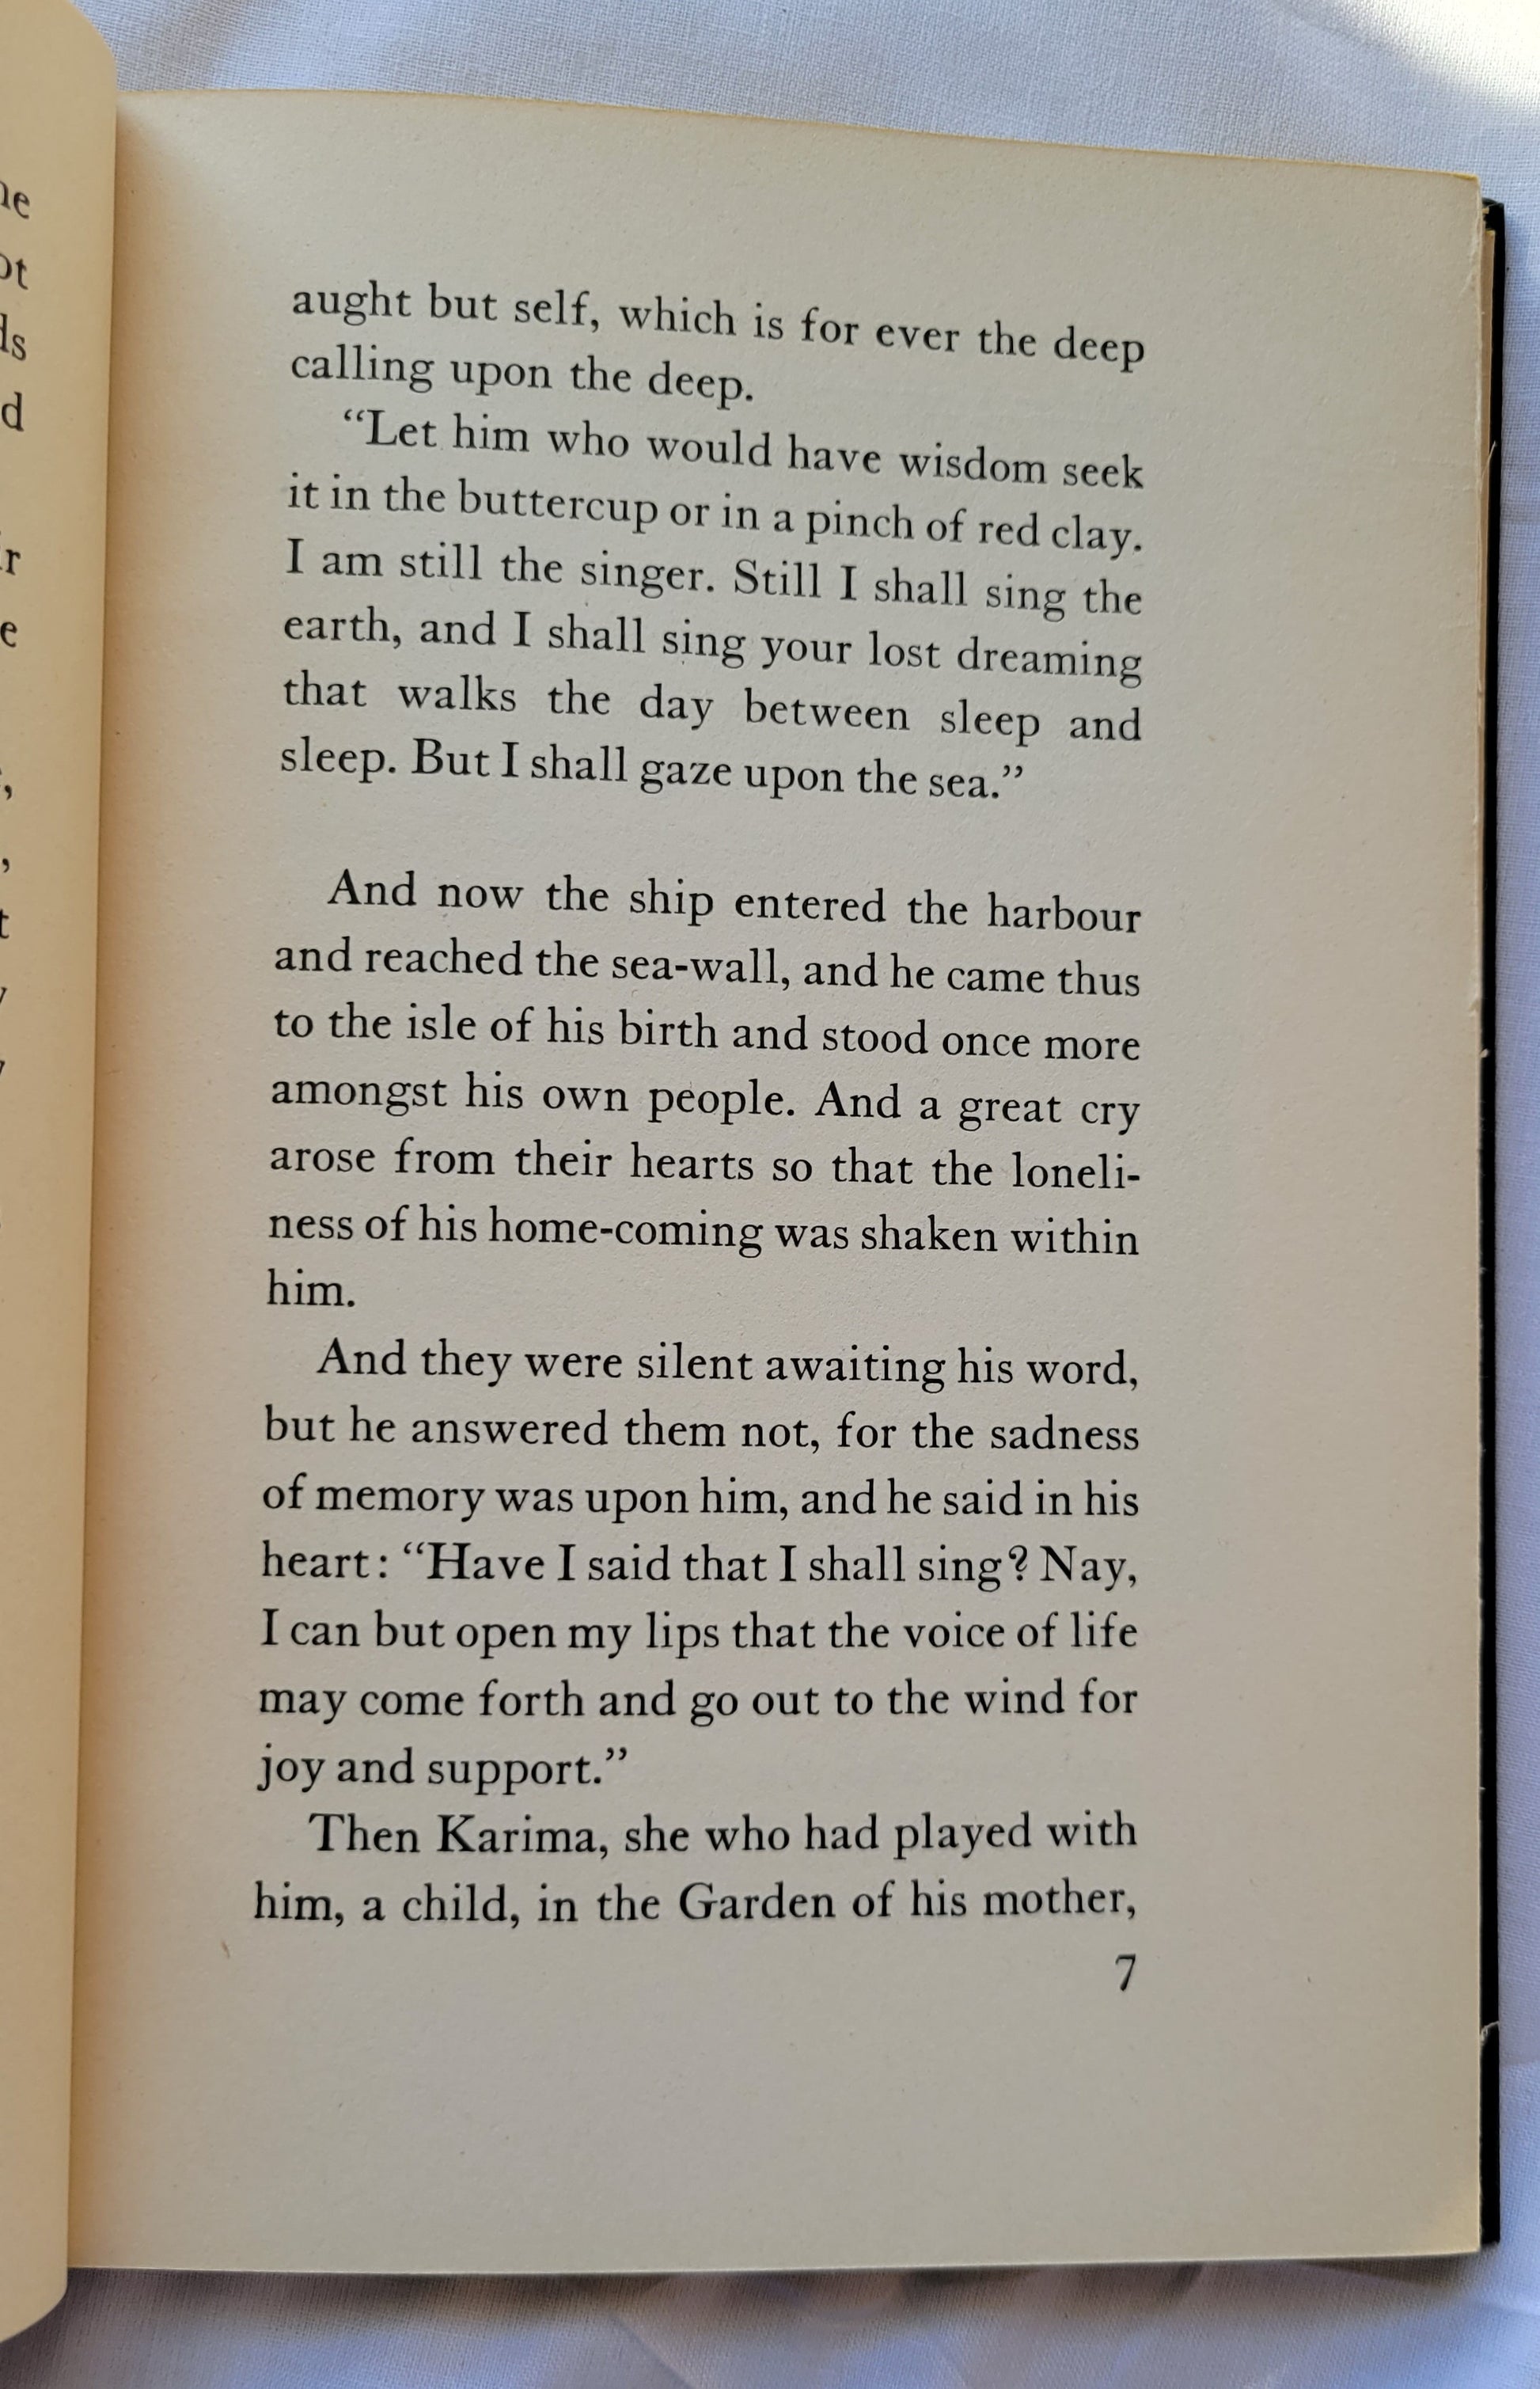 Vintage book for sale “The Garden of the Prophet” by Kahlil Gibran, published by Alfred A. Knoff. Page 7